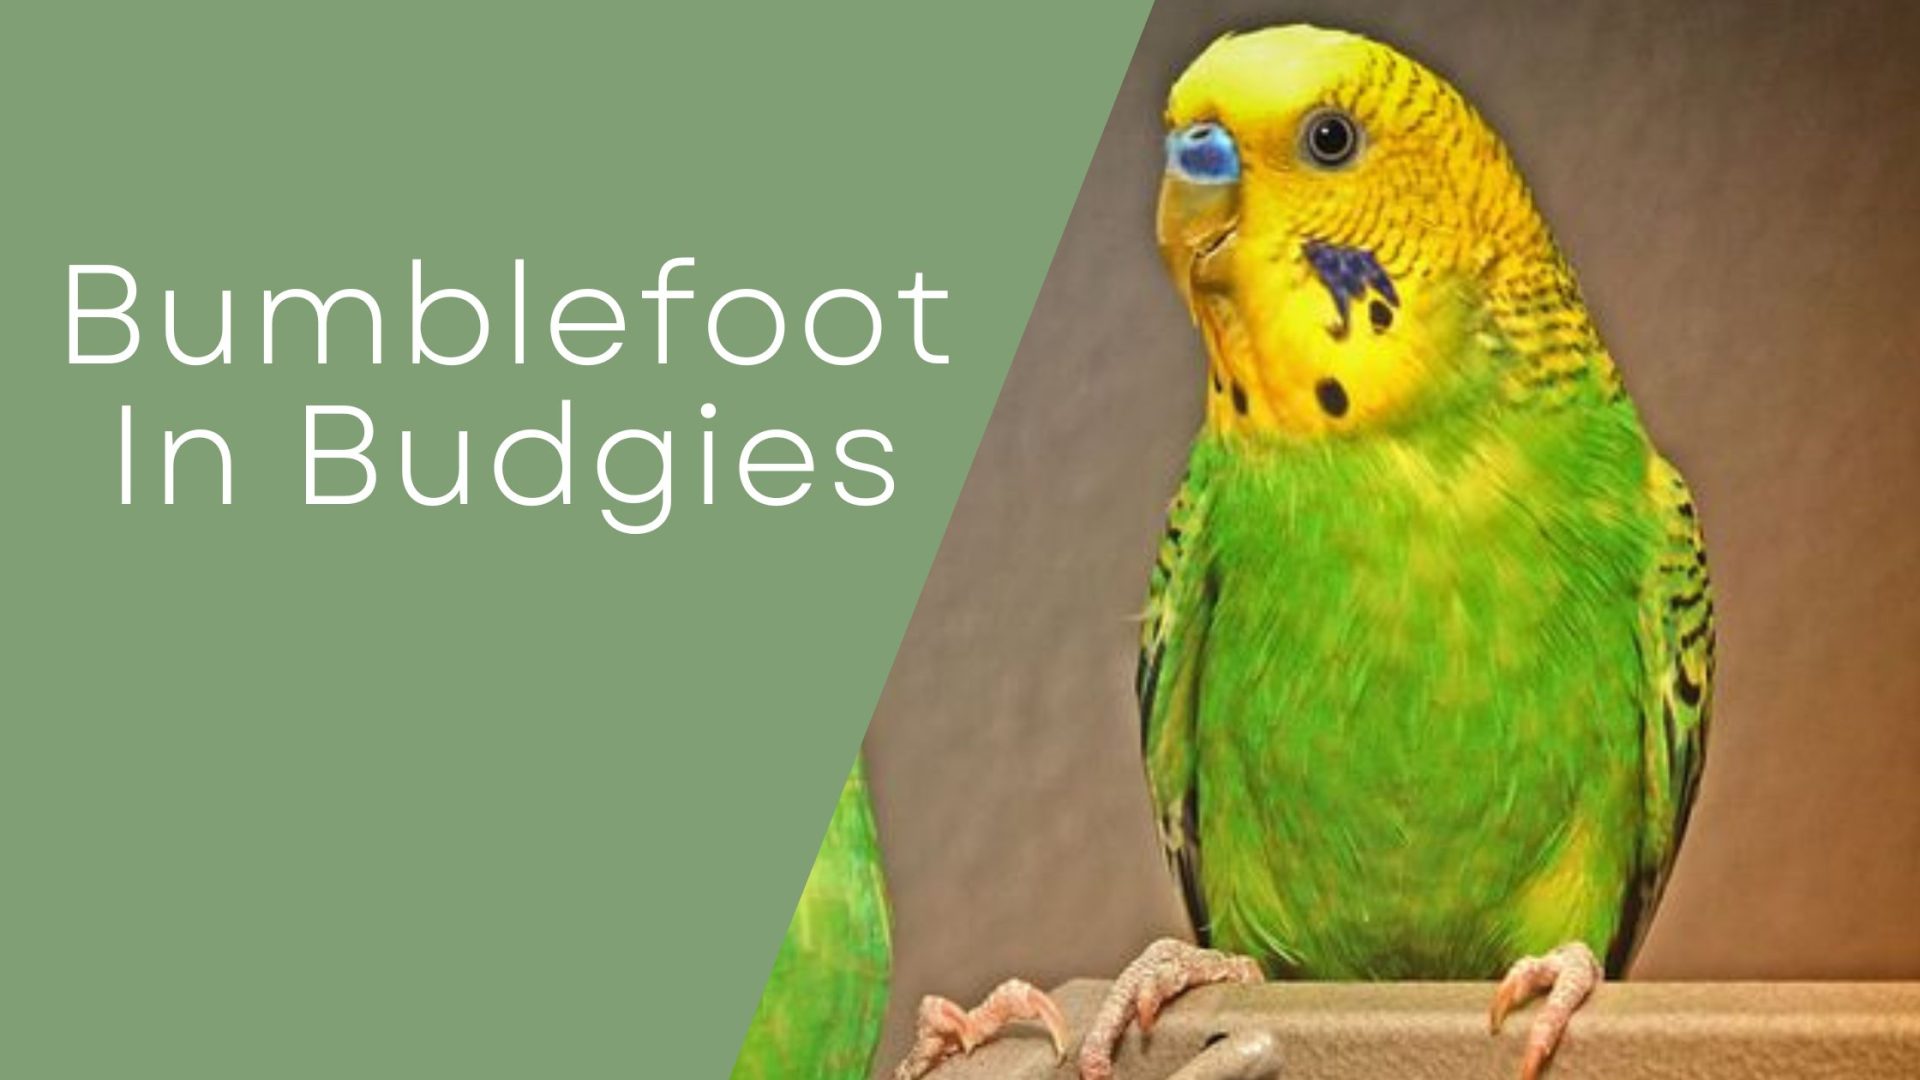 Bumblefoot In Budgies